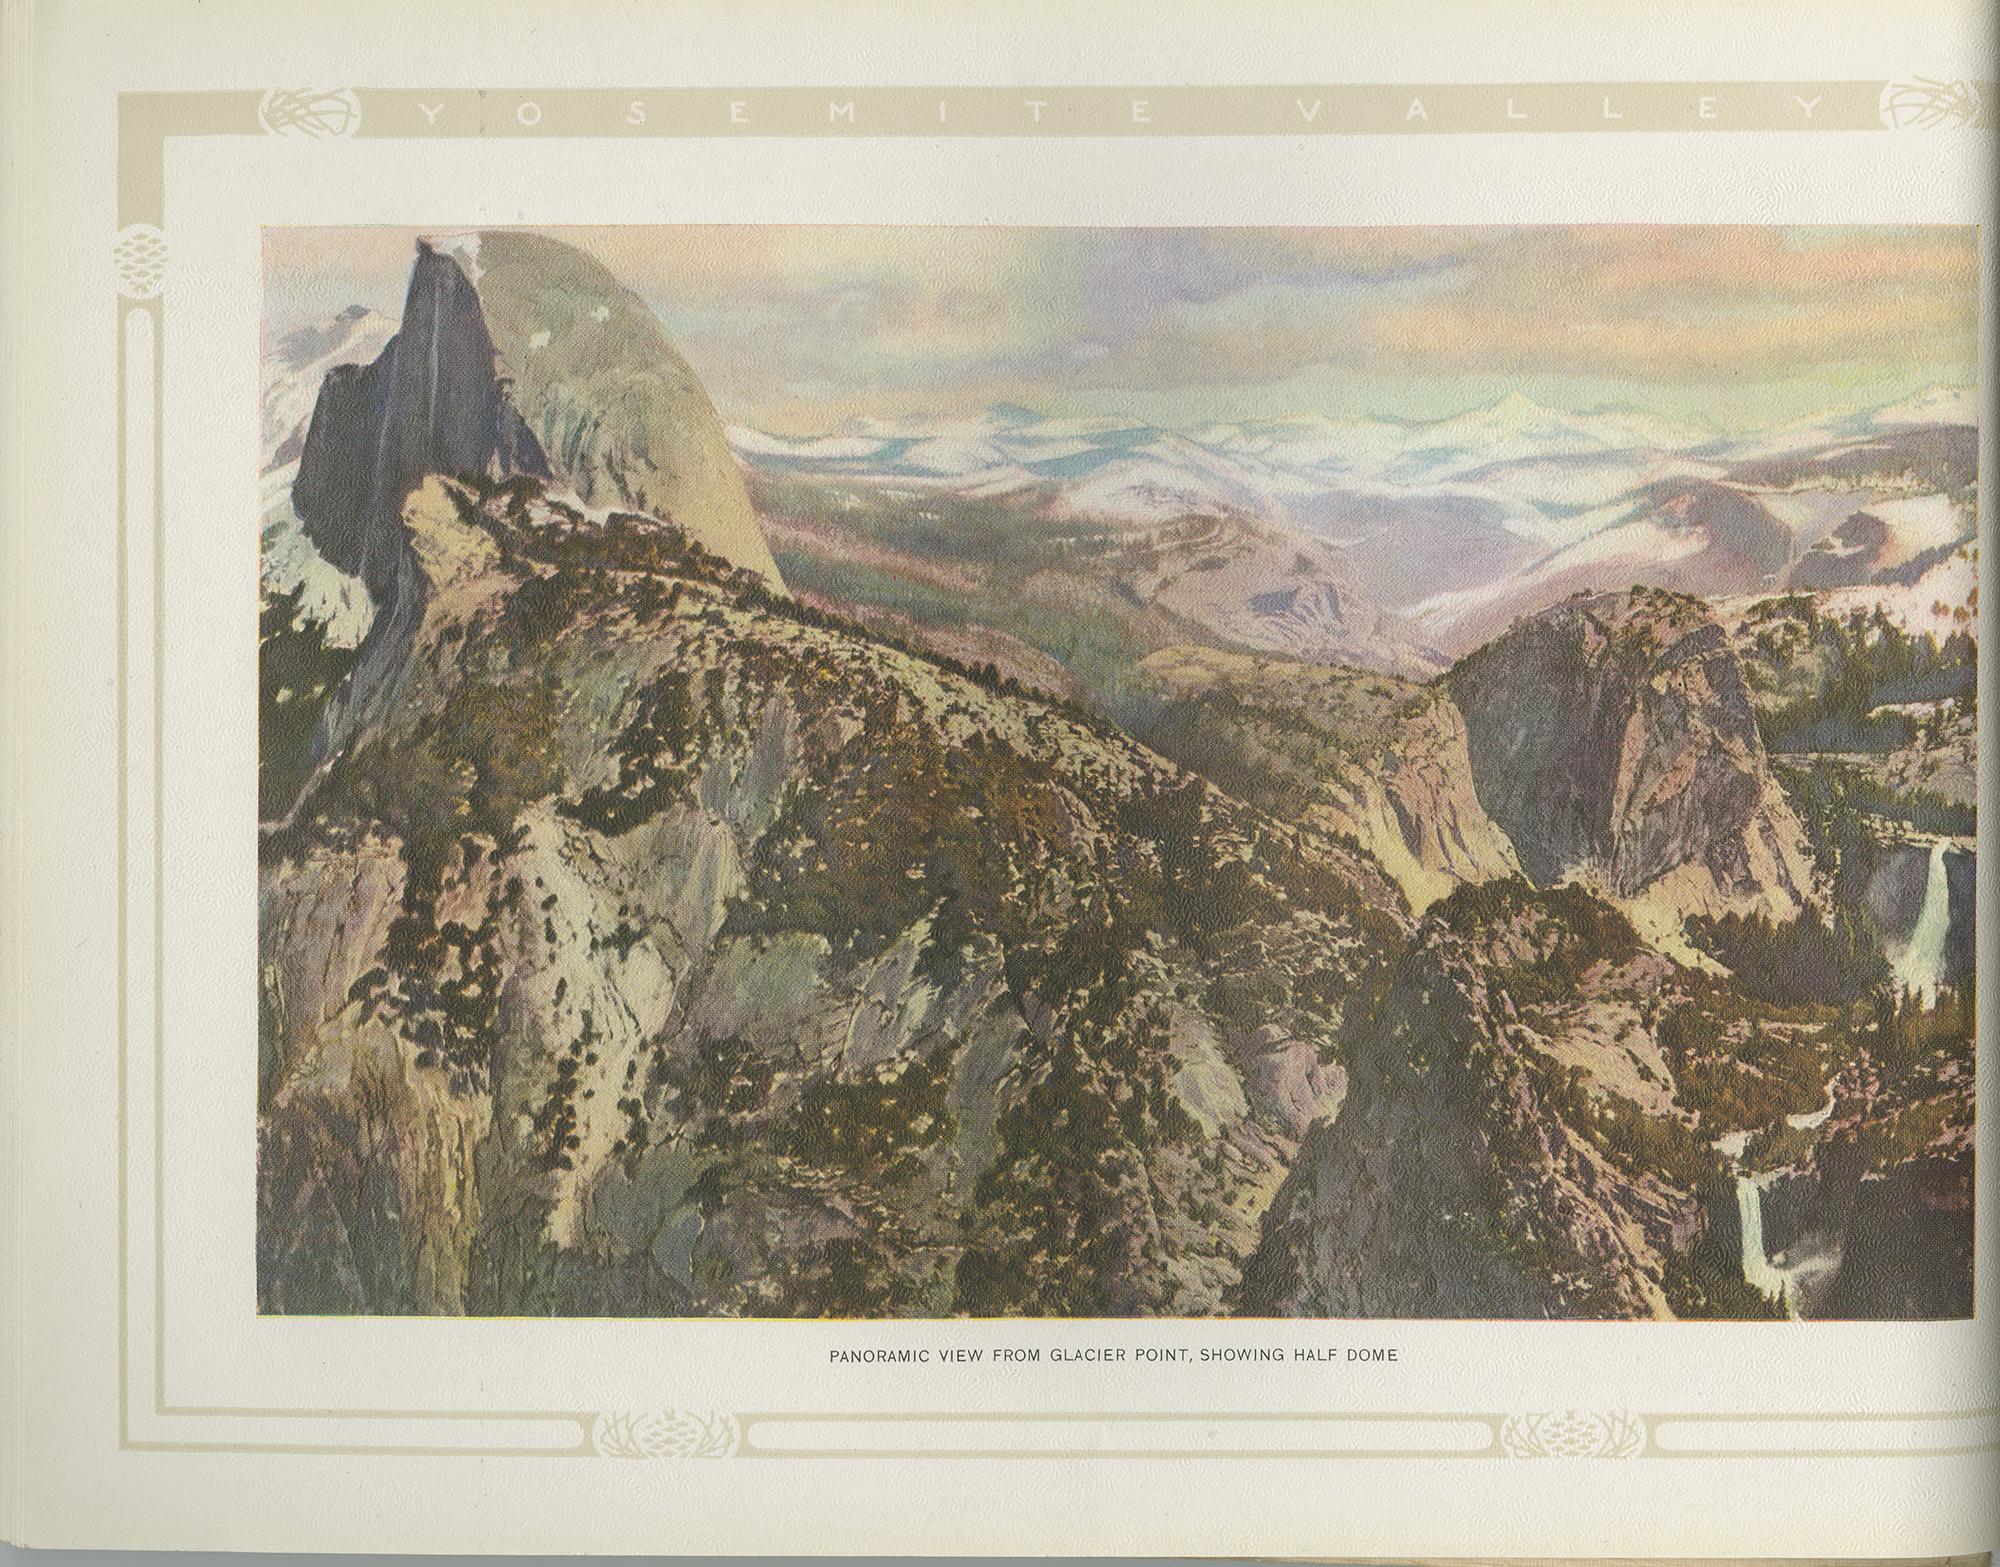 20th Century Antique Booklet 'Yosemite National Park' by O.W. Lehmer, 1912